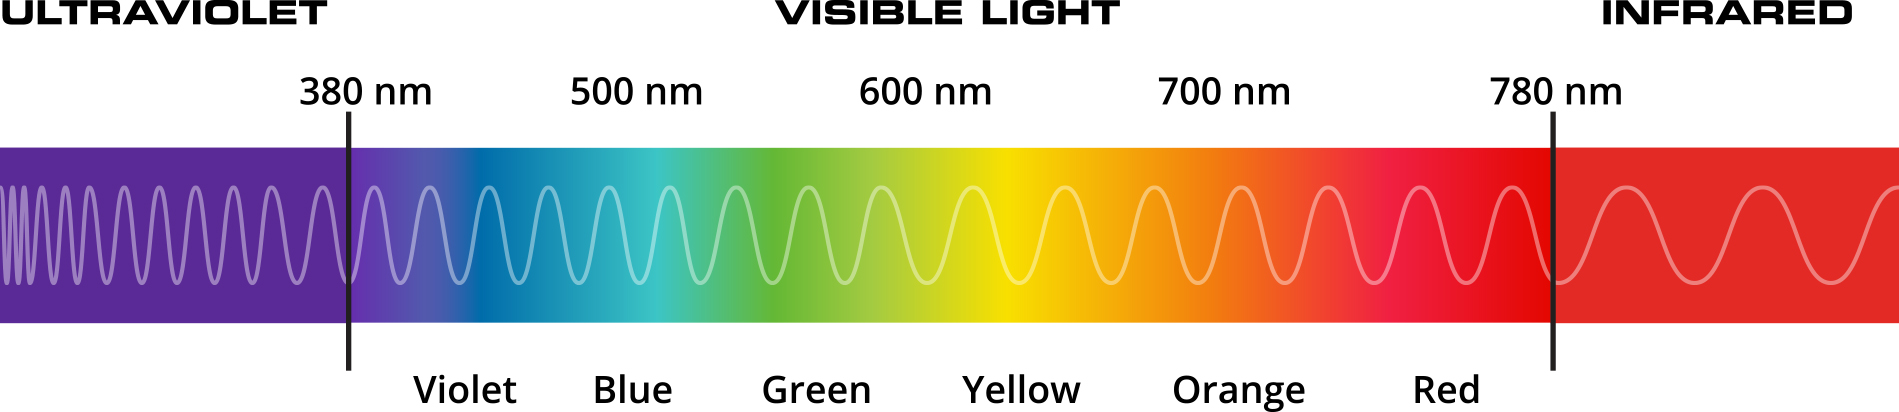 Ultraviolet-, Visible- And Infrared Light